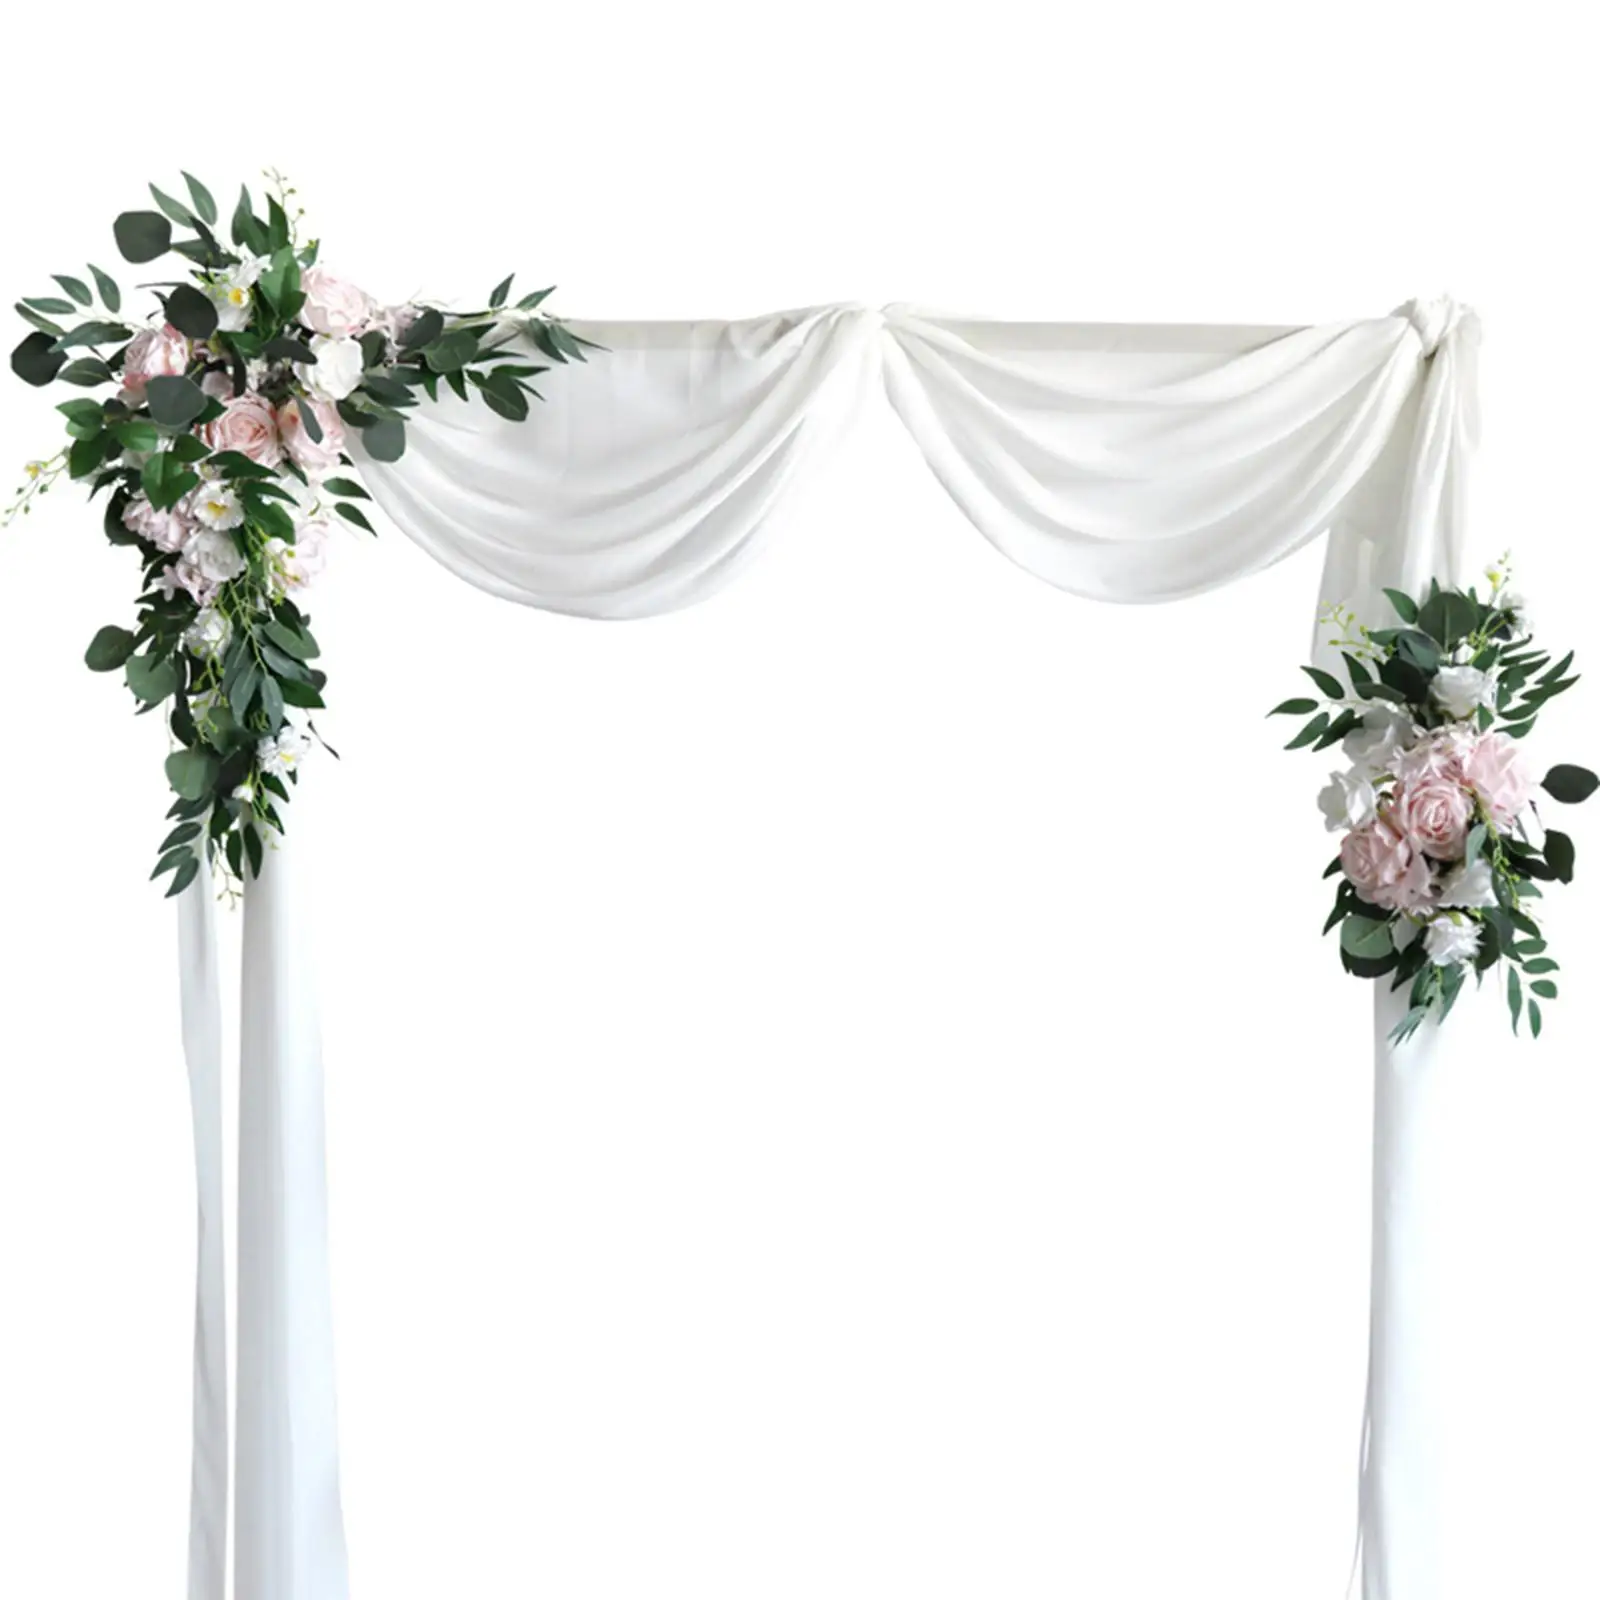 2x Artificial Wedding Arch Flowers Floral Arrangement Ceremony White Draping Fabric Party Greenery Arbor Decor 